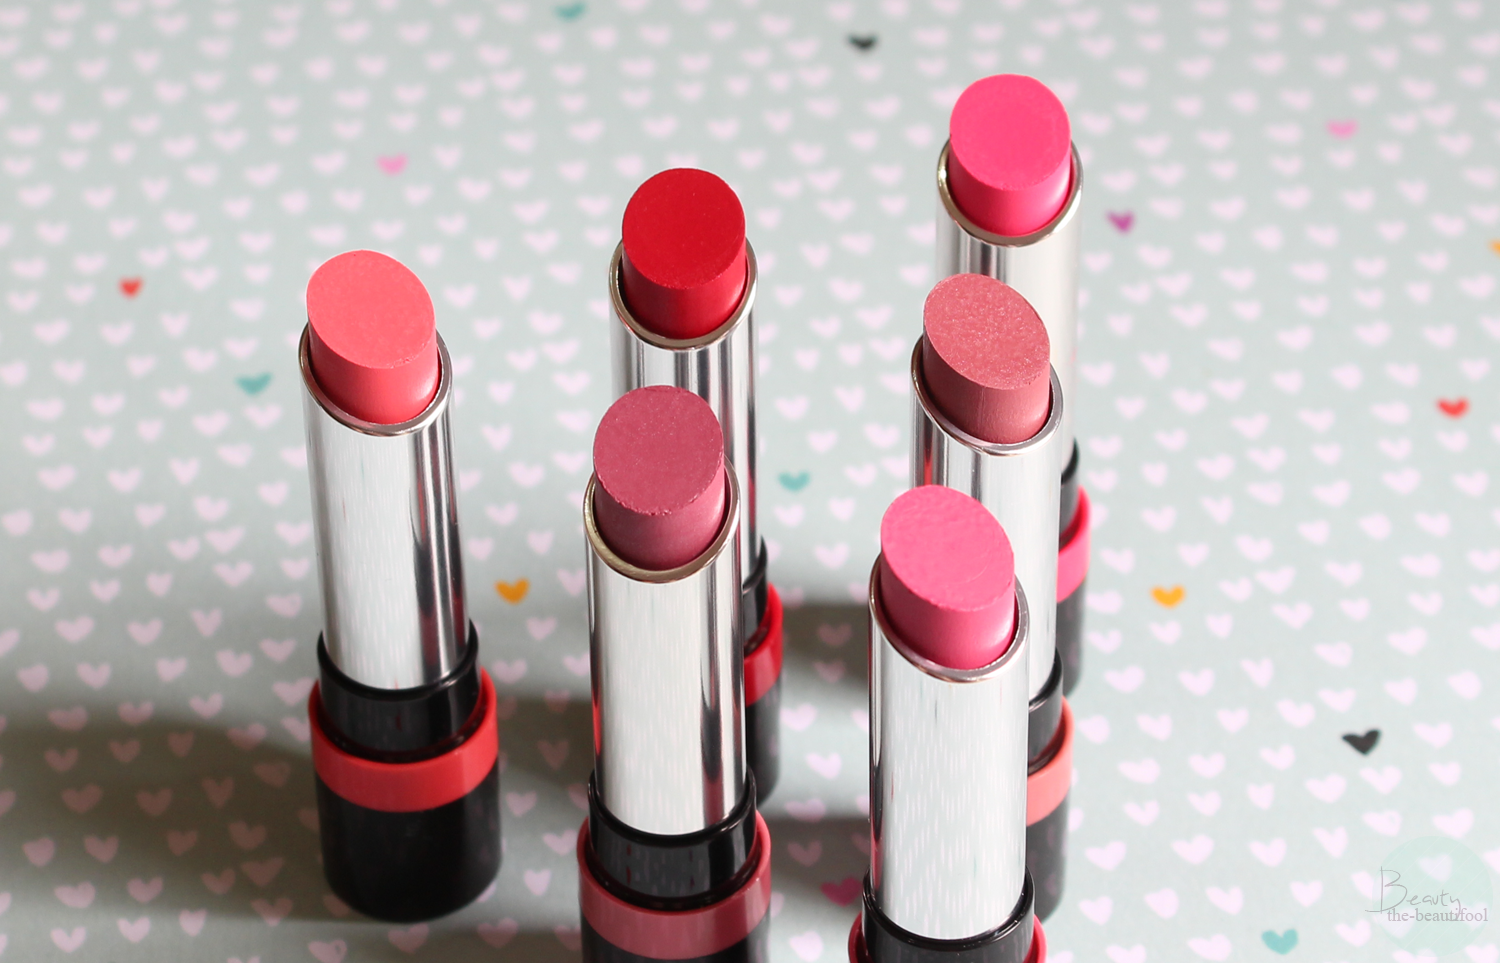 RIMMEL LONDON The Only 1 Lipsticks ($17.95/12 shades) reminds me a lot of t...